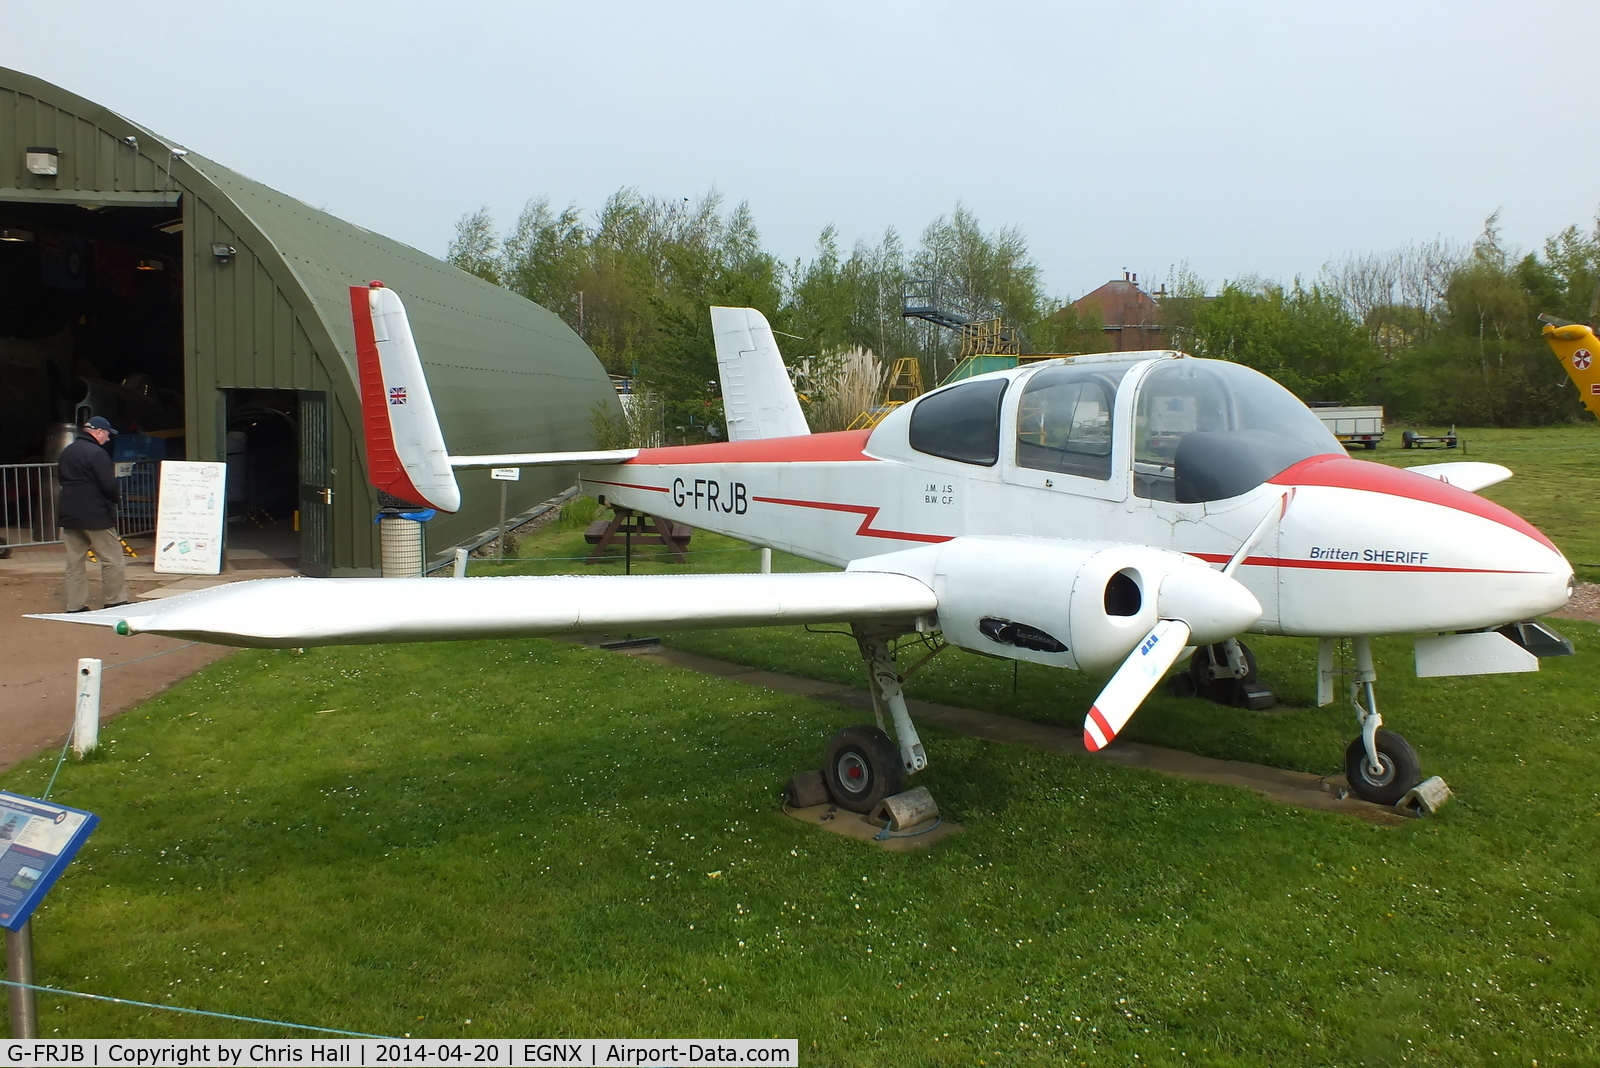 G-FRJB, 1976 Britten Sheriff SA.1 C/N 0001, Preserved at the East Midlands Aeropark